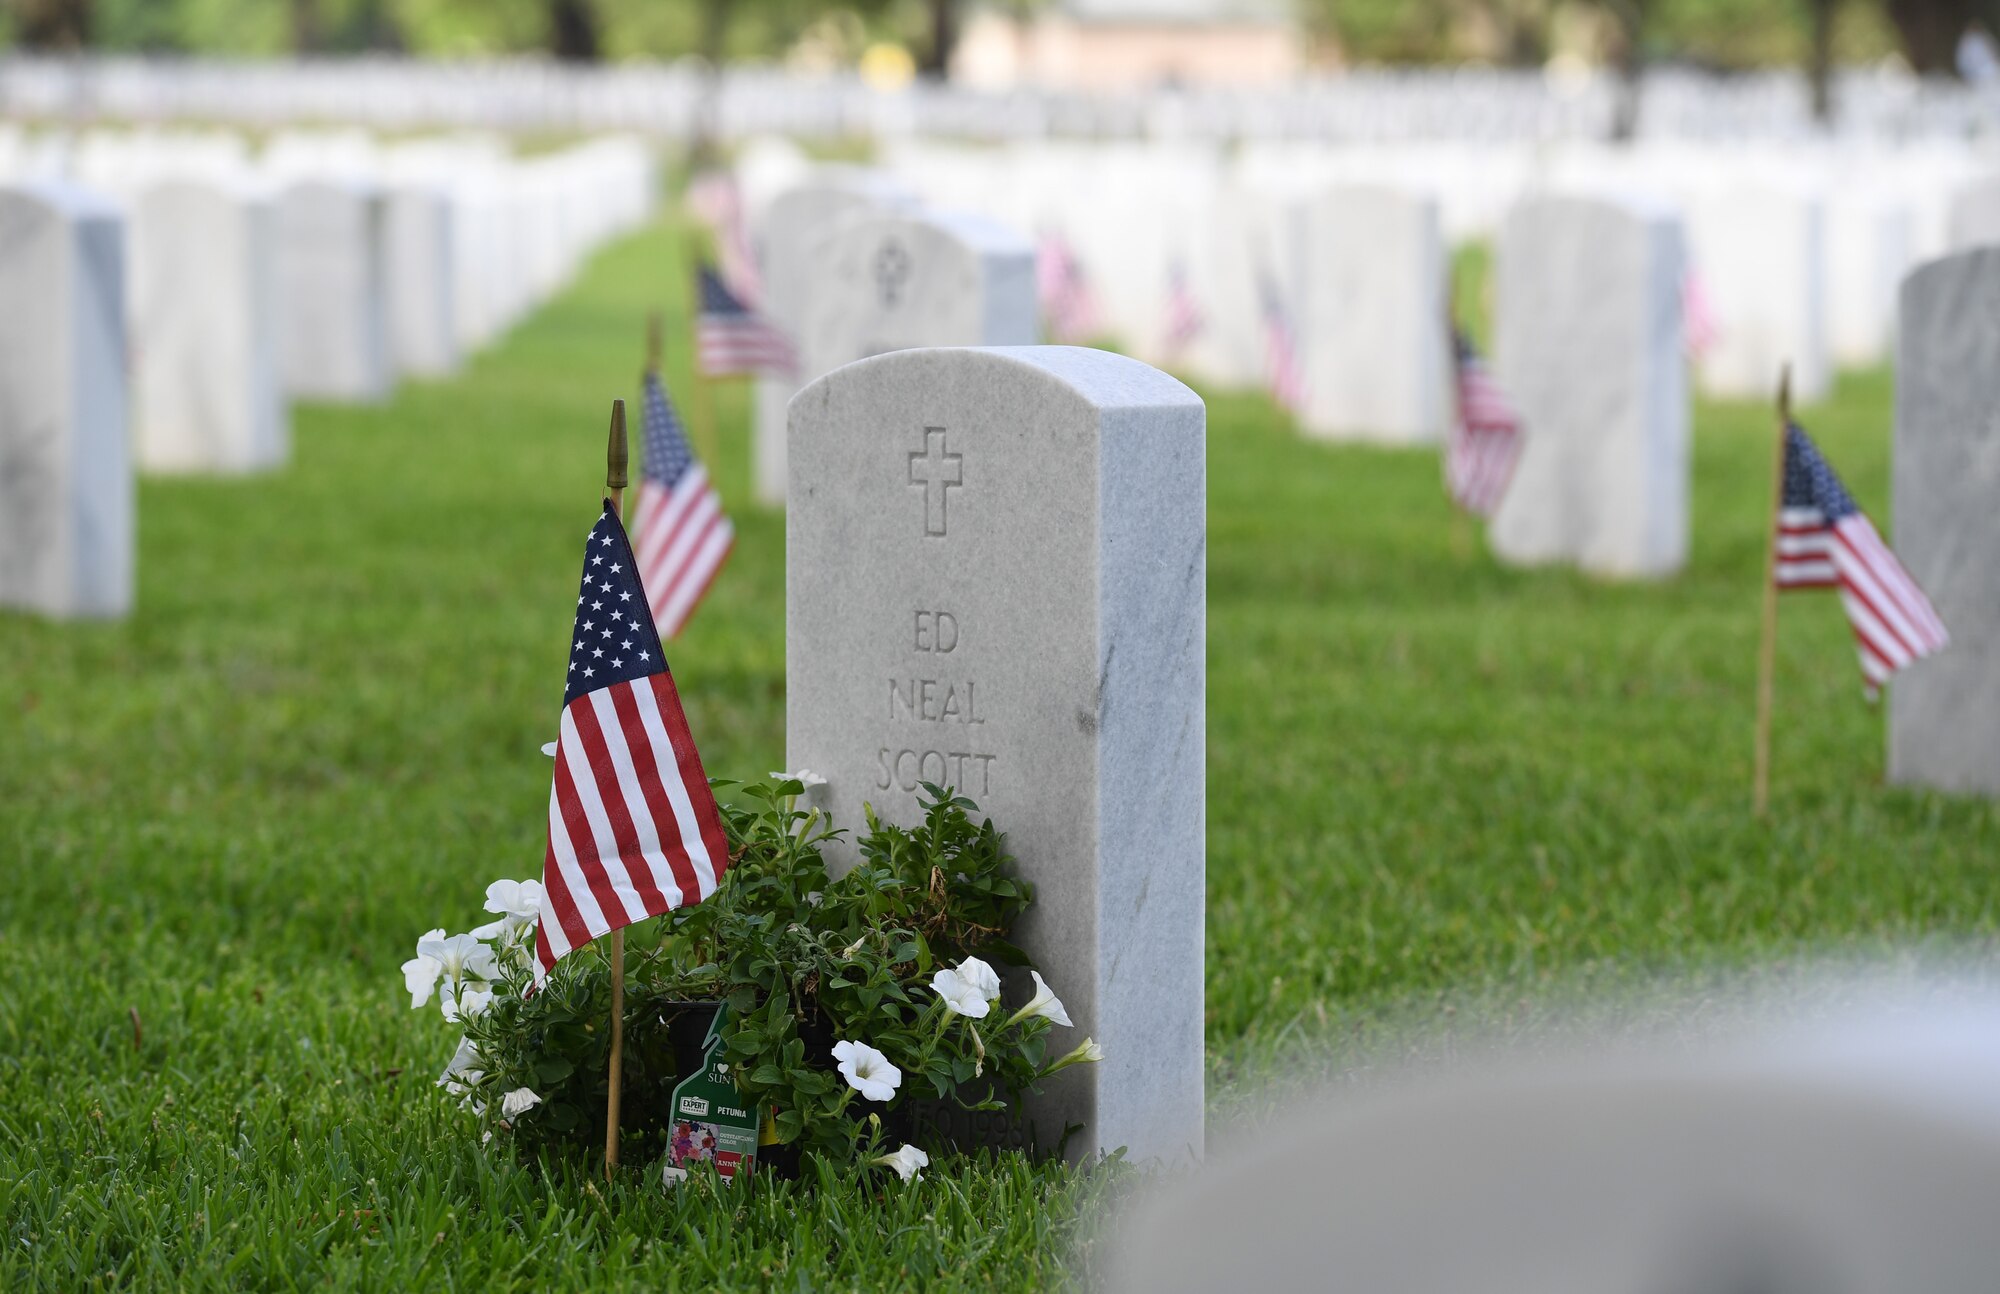 American flags are displayed in front of tomb stones at the Biloxi National Cemetery Memorial Day Ceremony in Biloxi, Mississippi, May 27, 2019. The ceremony honored those who have made the ultimate sacrifice while serving in the armed forces. Biloxi National Cemetery is the final resting place of more than 23,000 veterans and their family members. Eight hundred burials take place there every year for men and women who served in wars years ago and for those defending America today. (U.S. Air Force photo by Kemberly Groue)